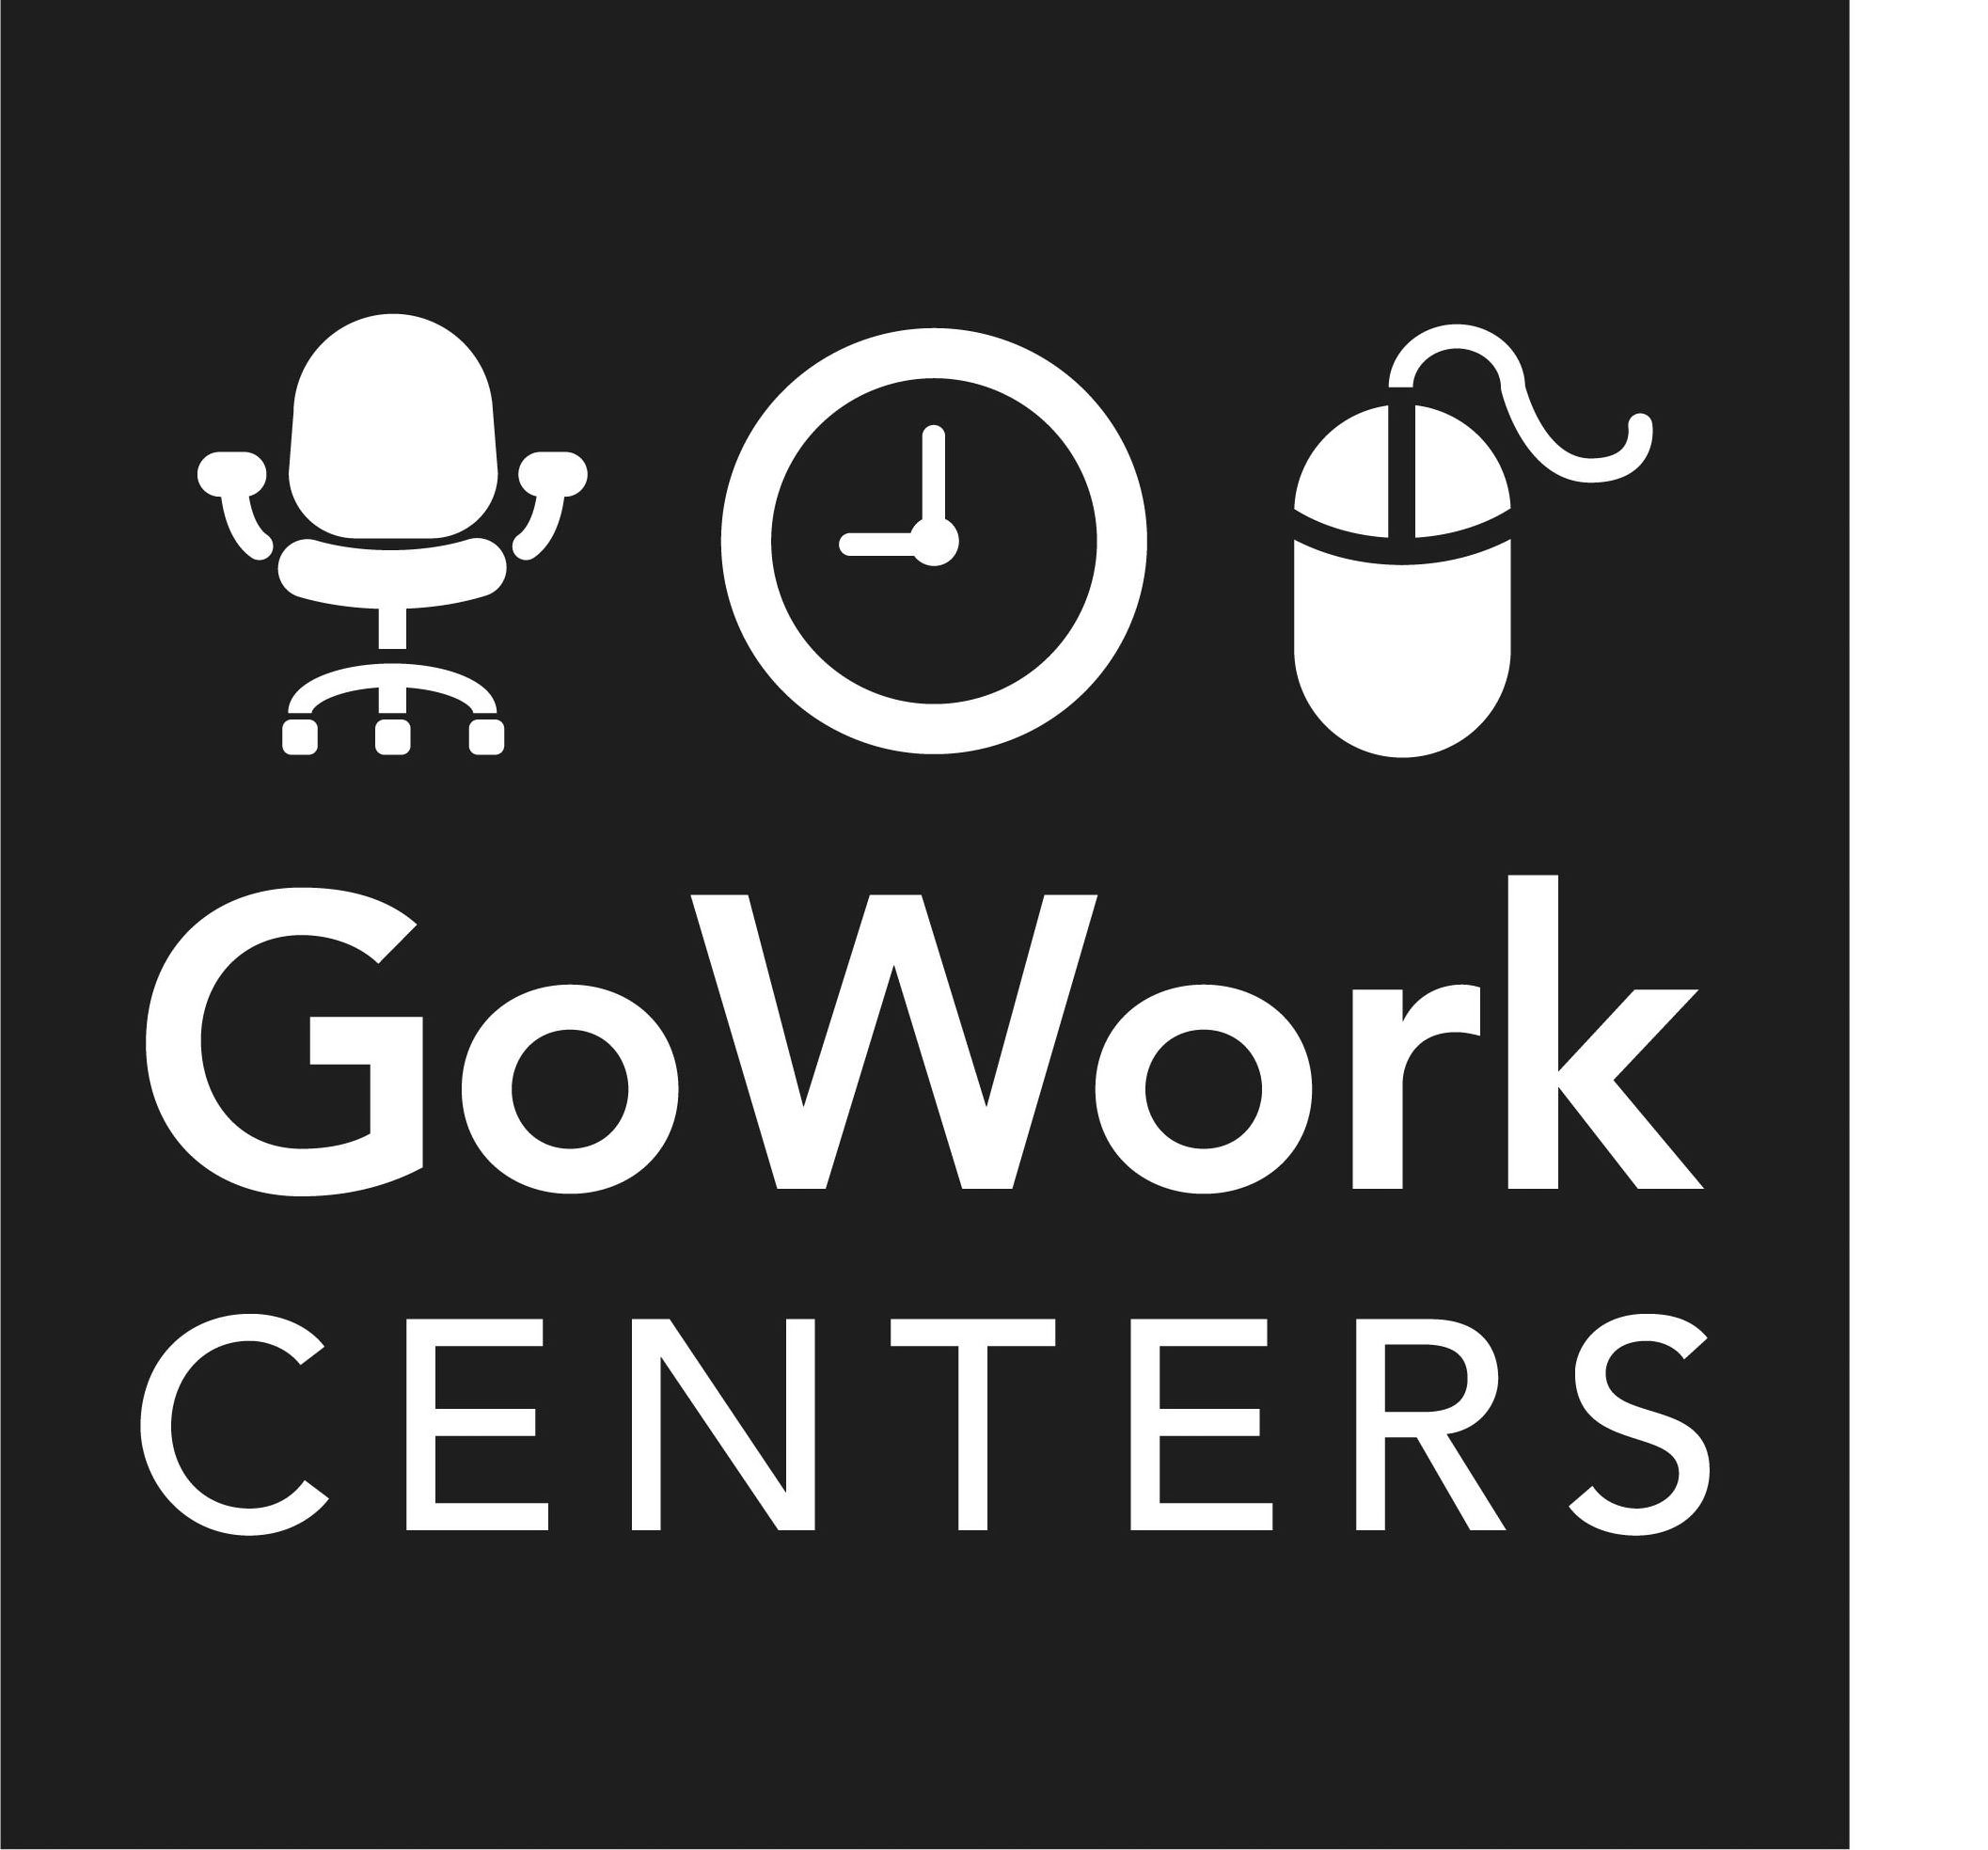 GOWORK CENTERS